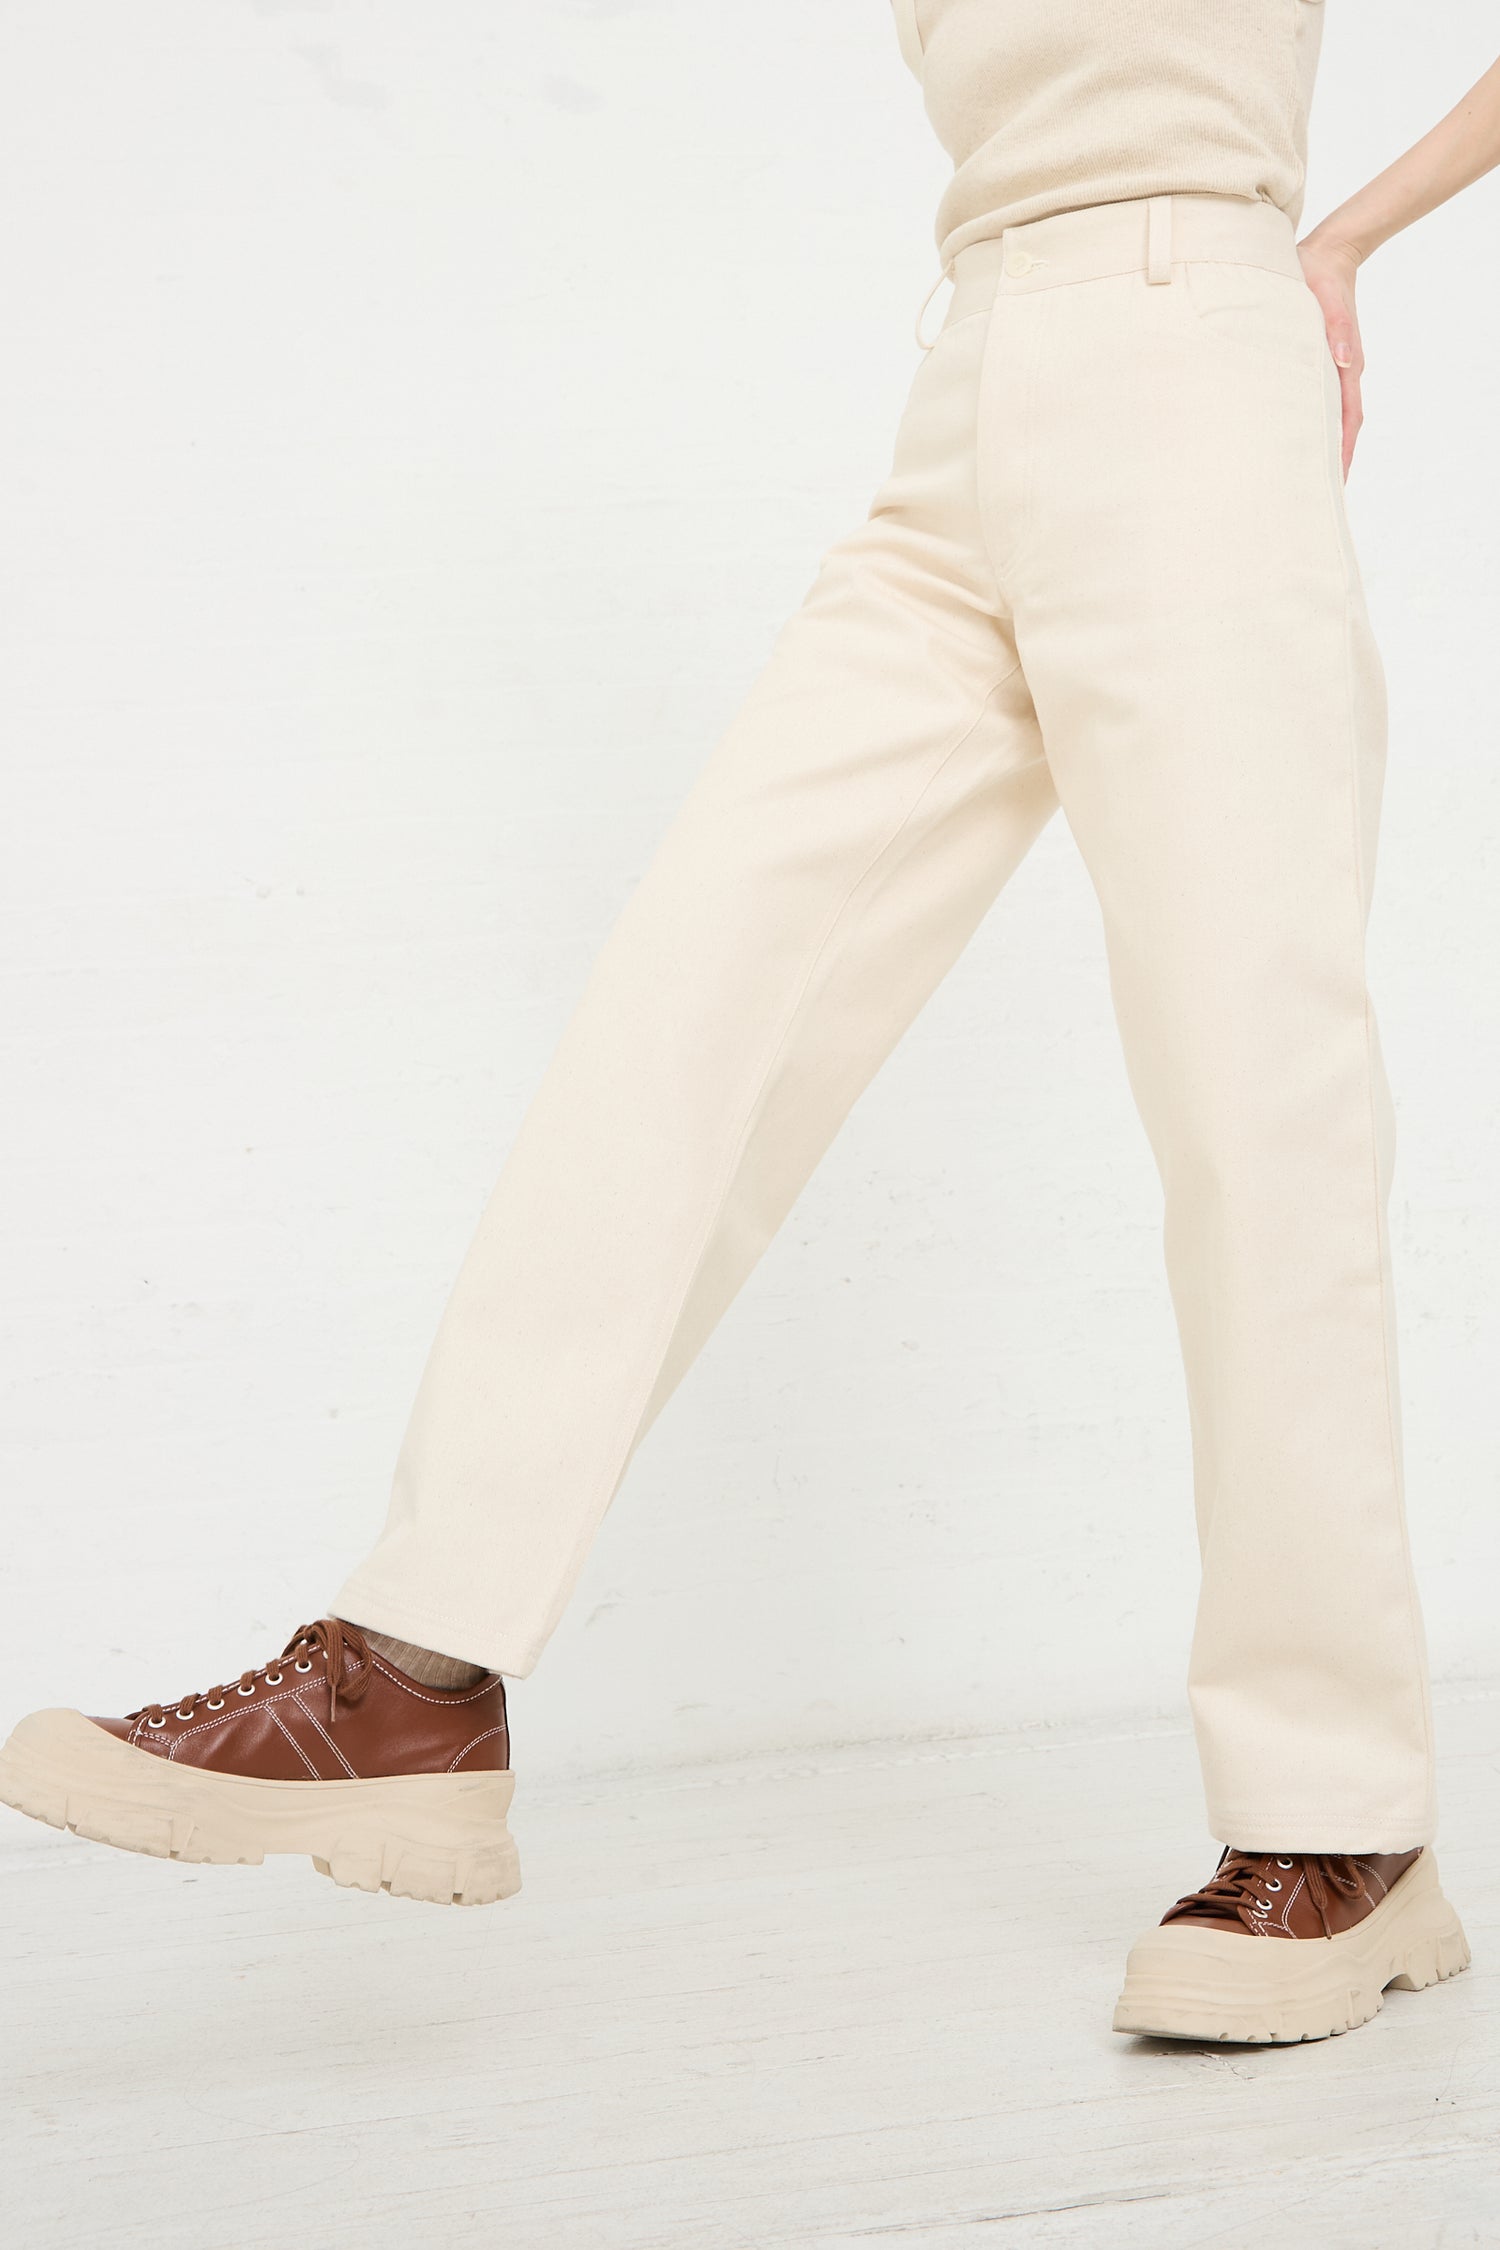 Person wearing Baserange's Organic Cotton Indre Pant in Undyed and brown chunky lace-up shoes walking against a white background.